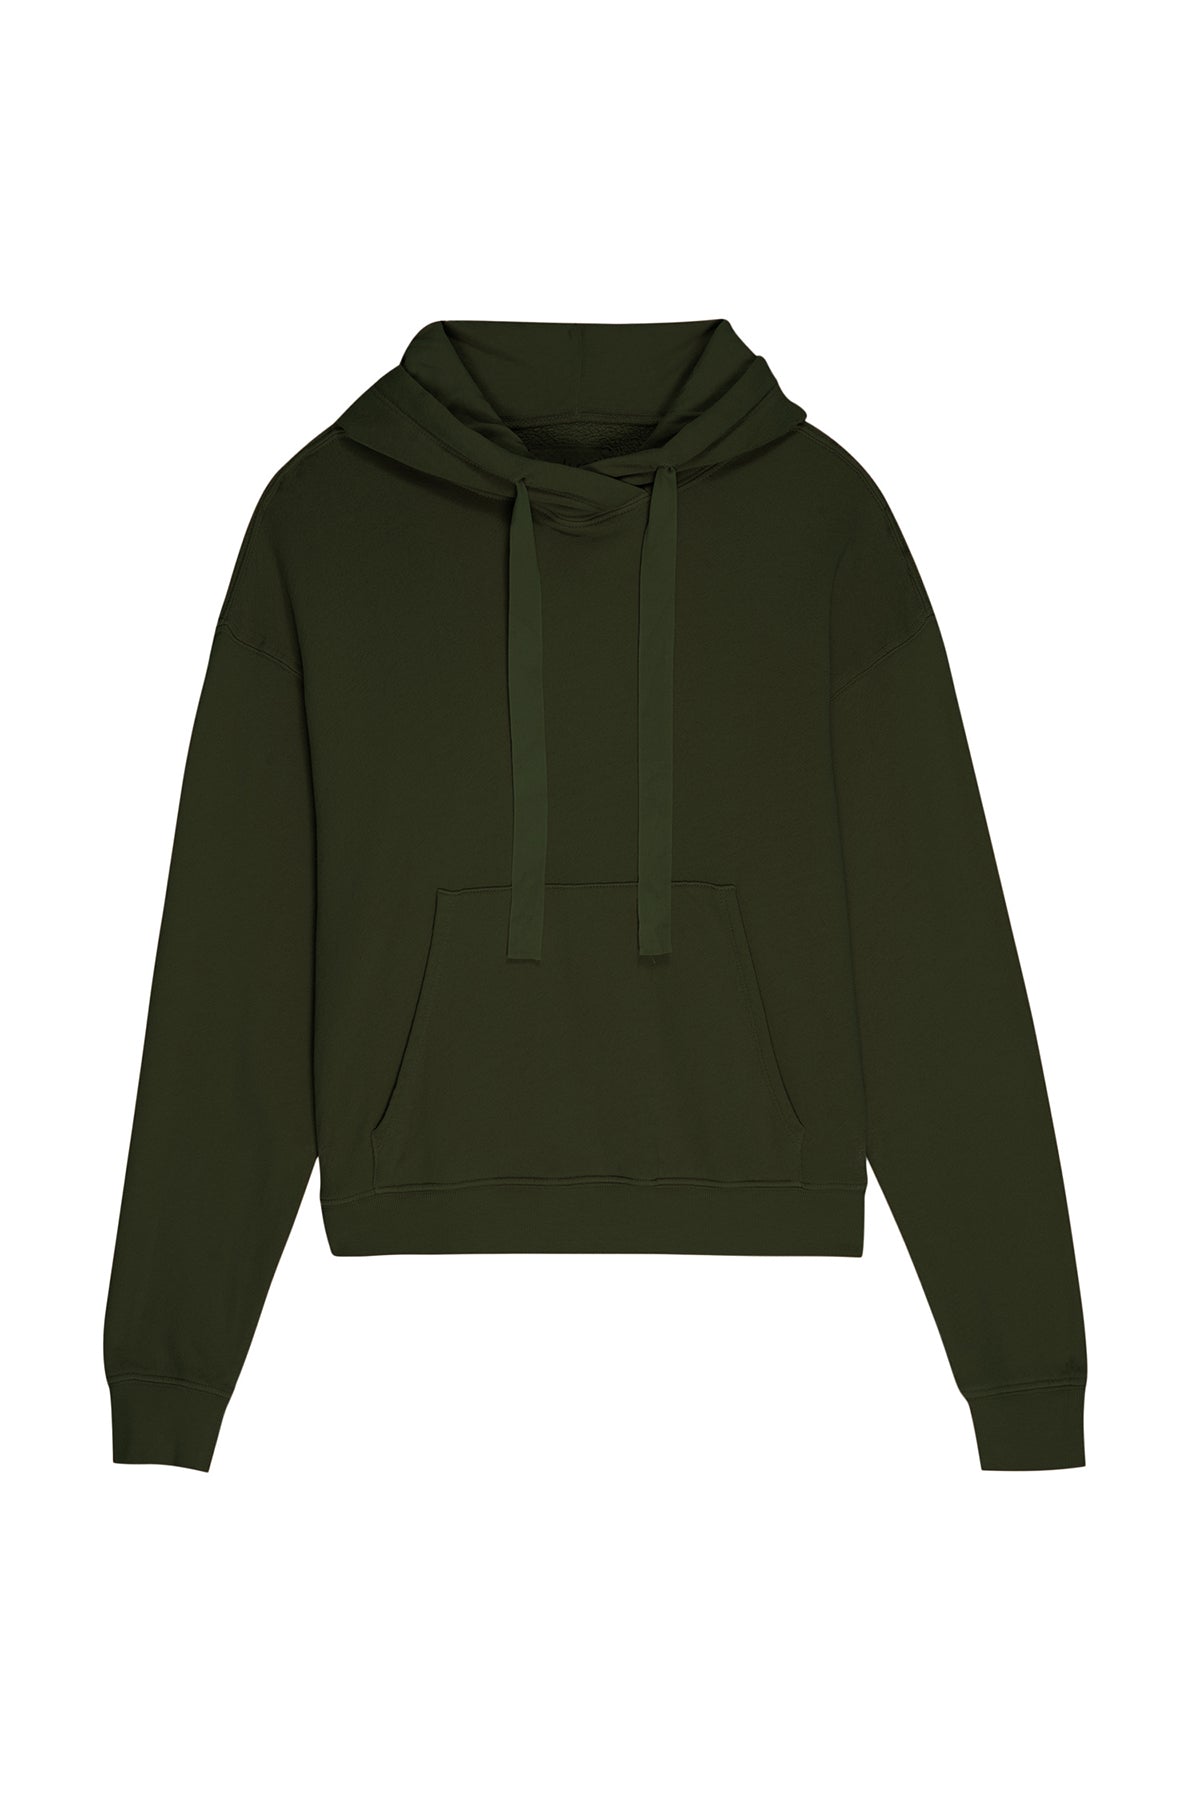 ojai hoodie dillweed front flat-35490669166785